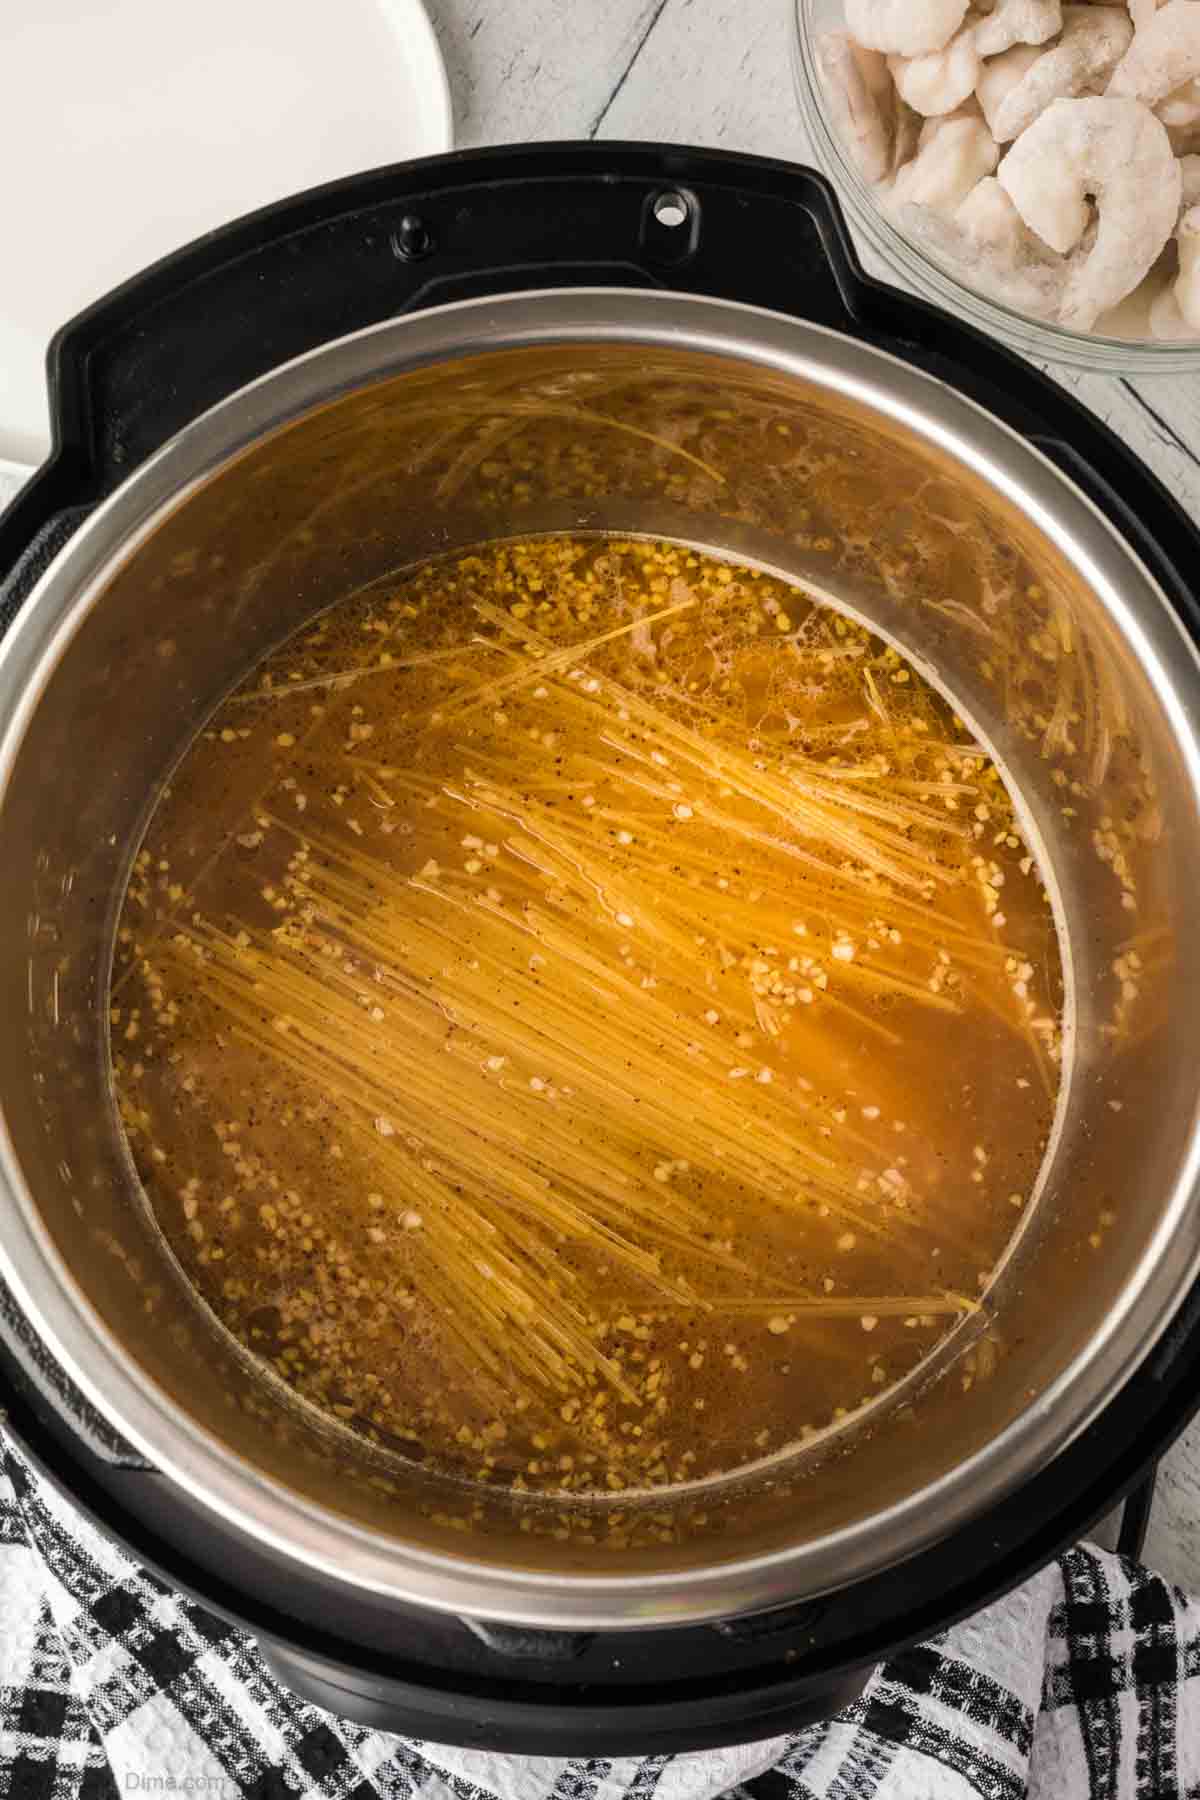 Mixing in the pasta to the instant pot